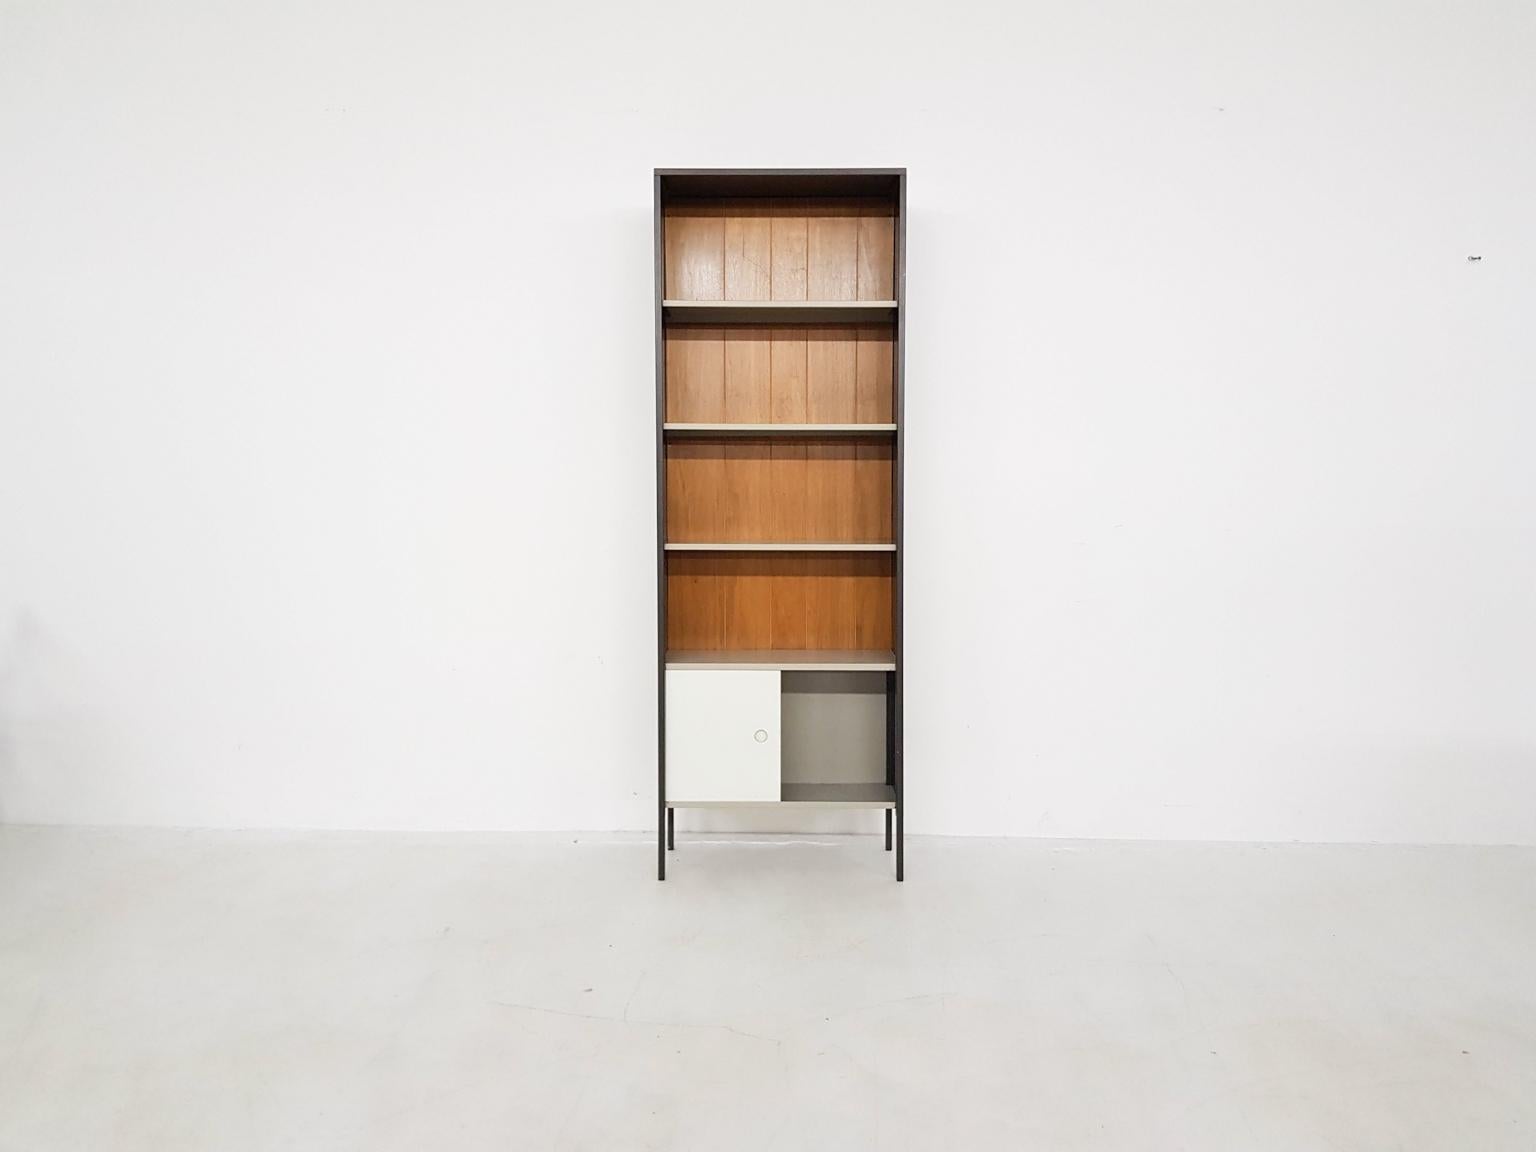 Dutch Midcentury Cabinet or Bookcase by Coen de Vries for Pilastro, the Netherlands